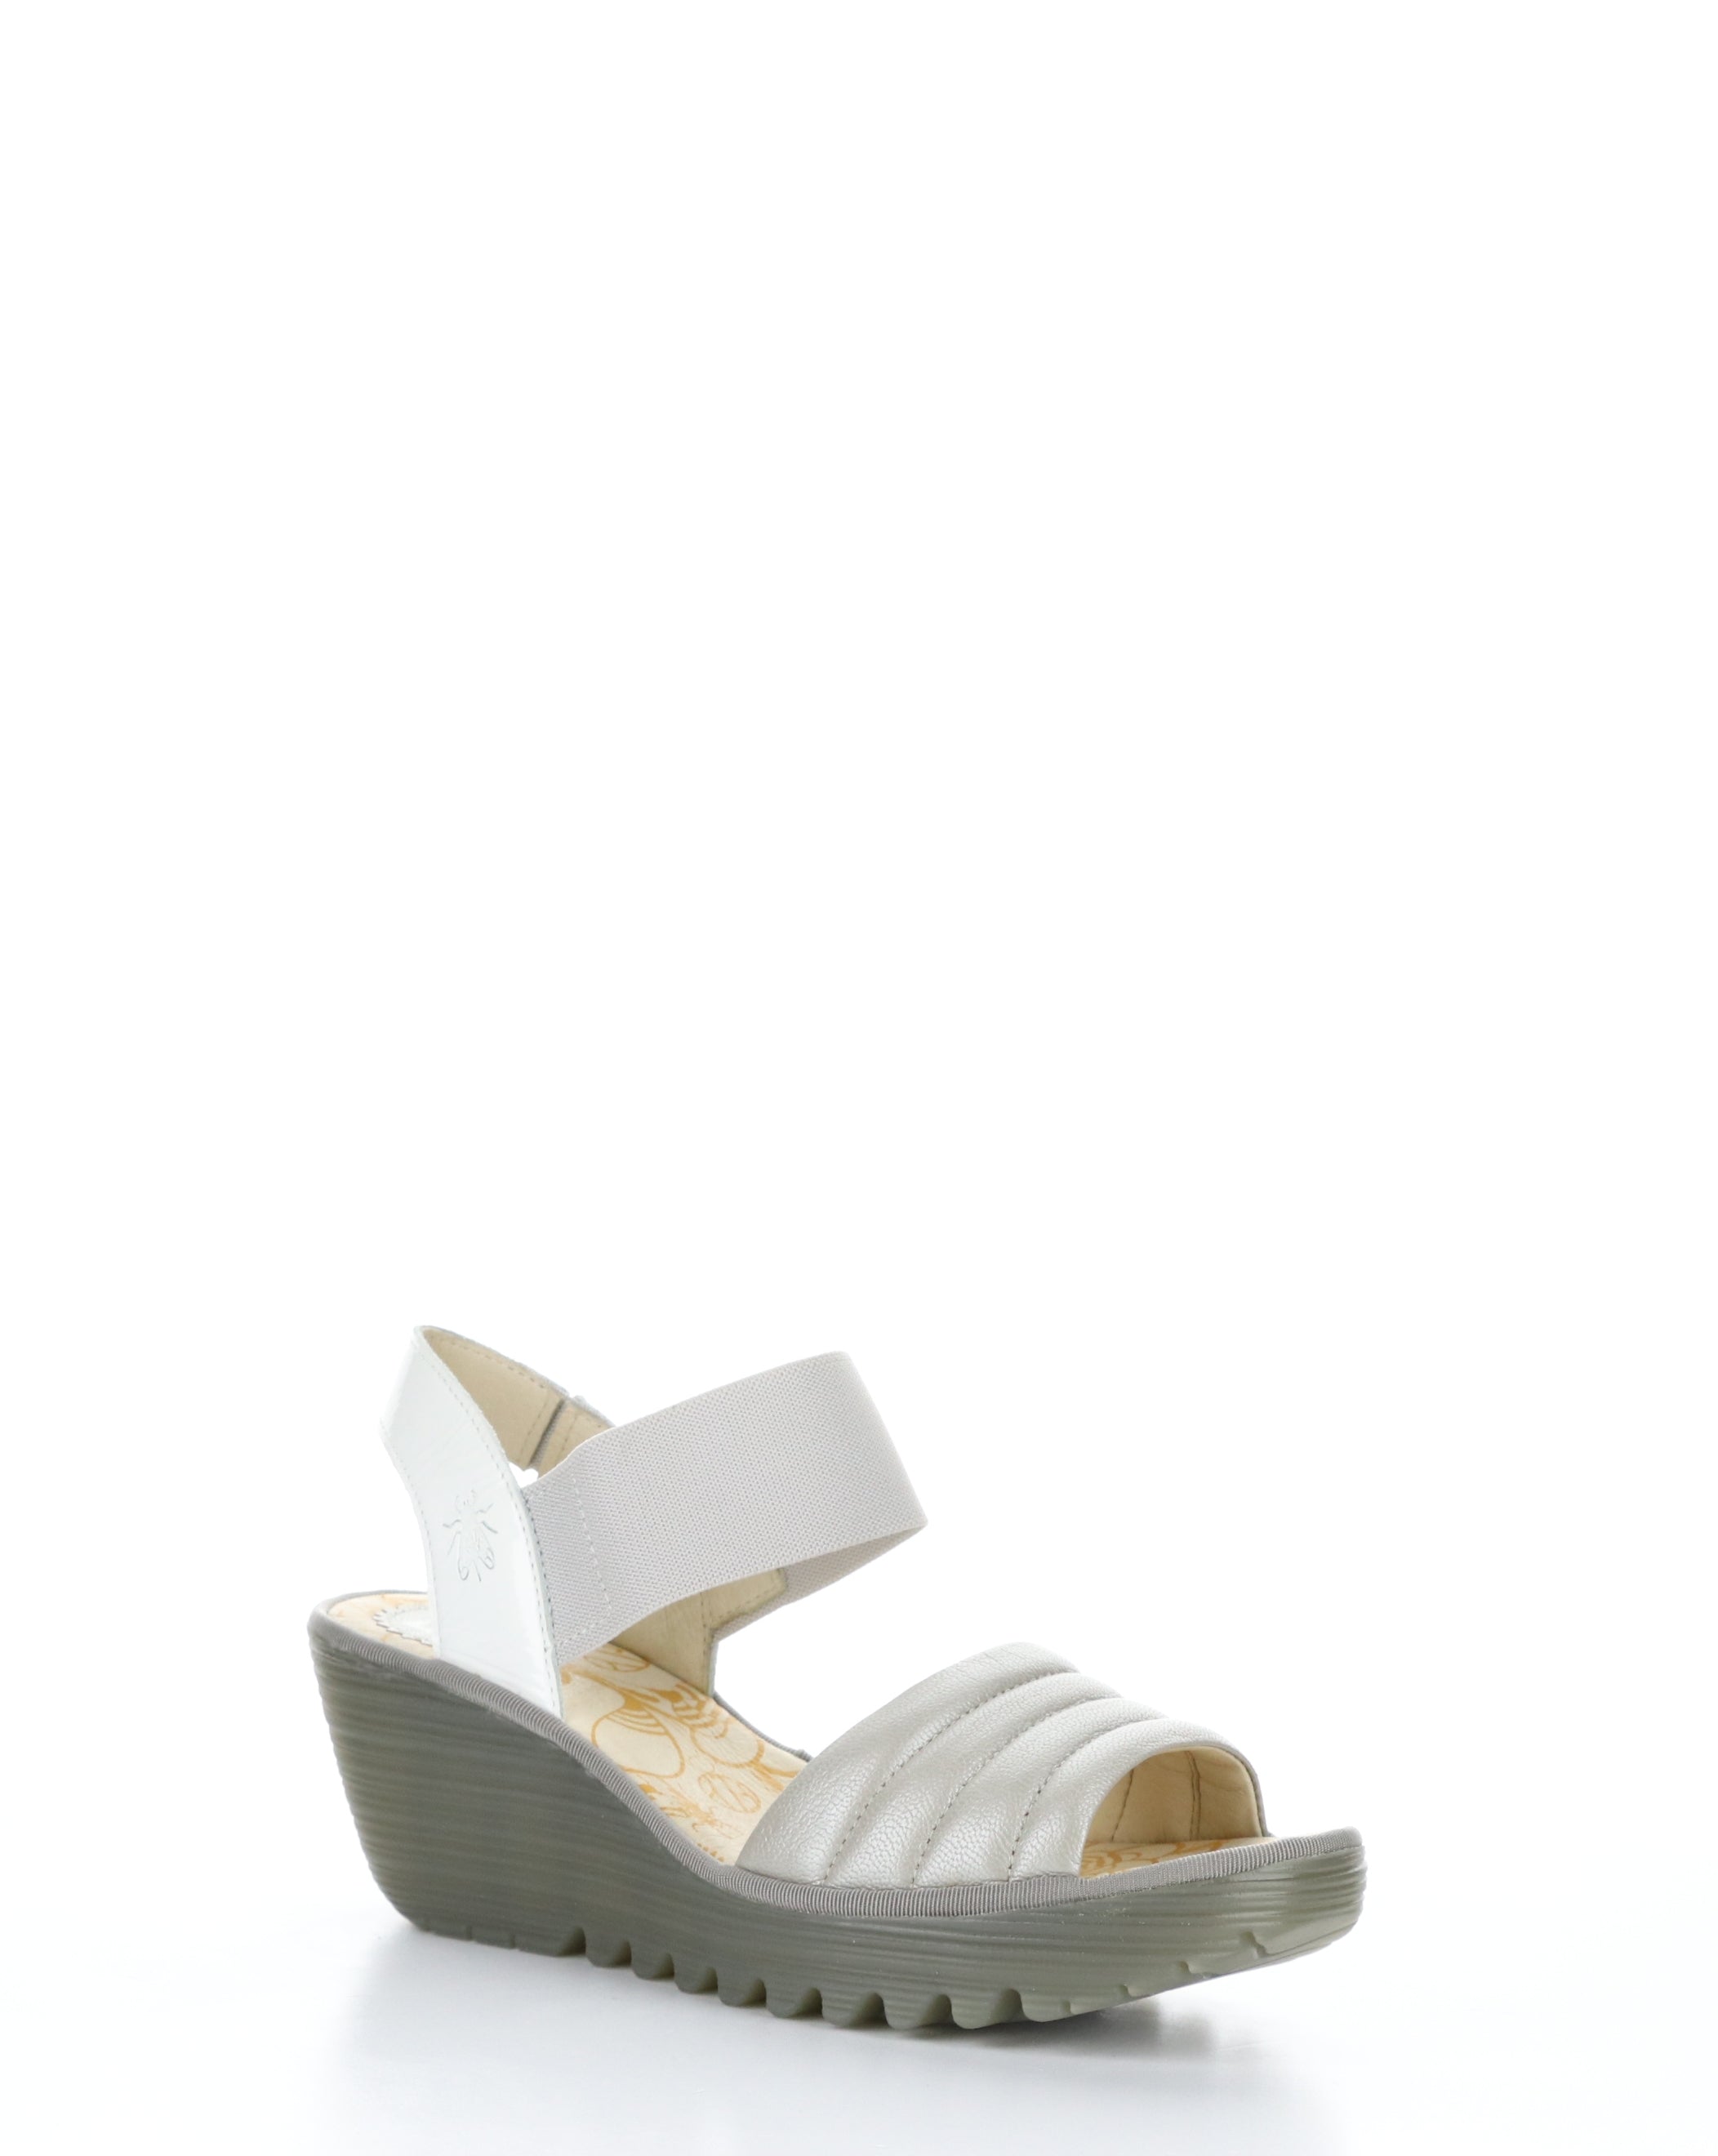 Fly London Yiko Silver/Off White Leather Wedge Sandal P501414 001